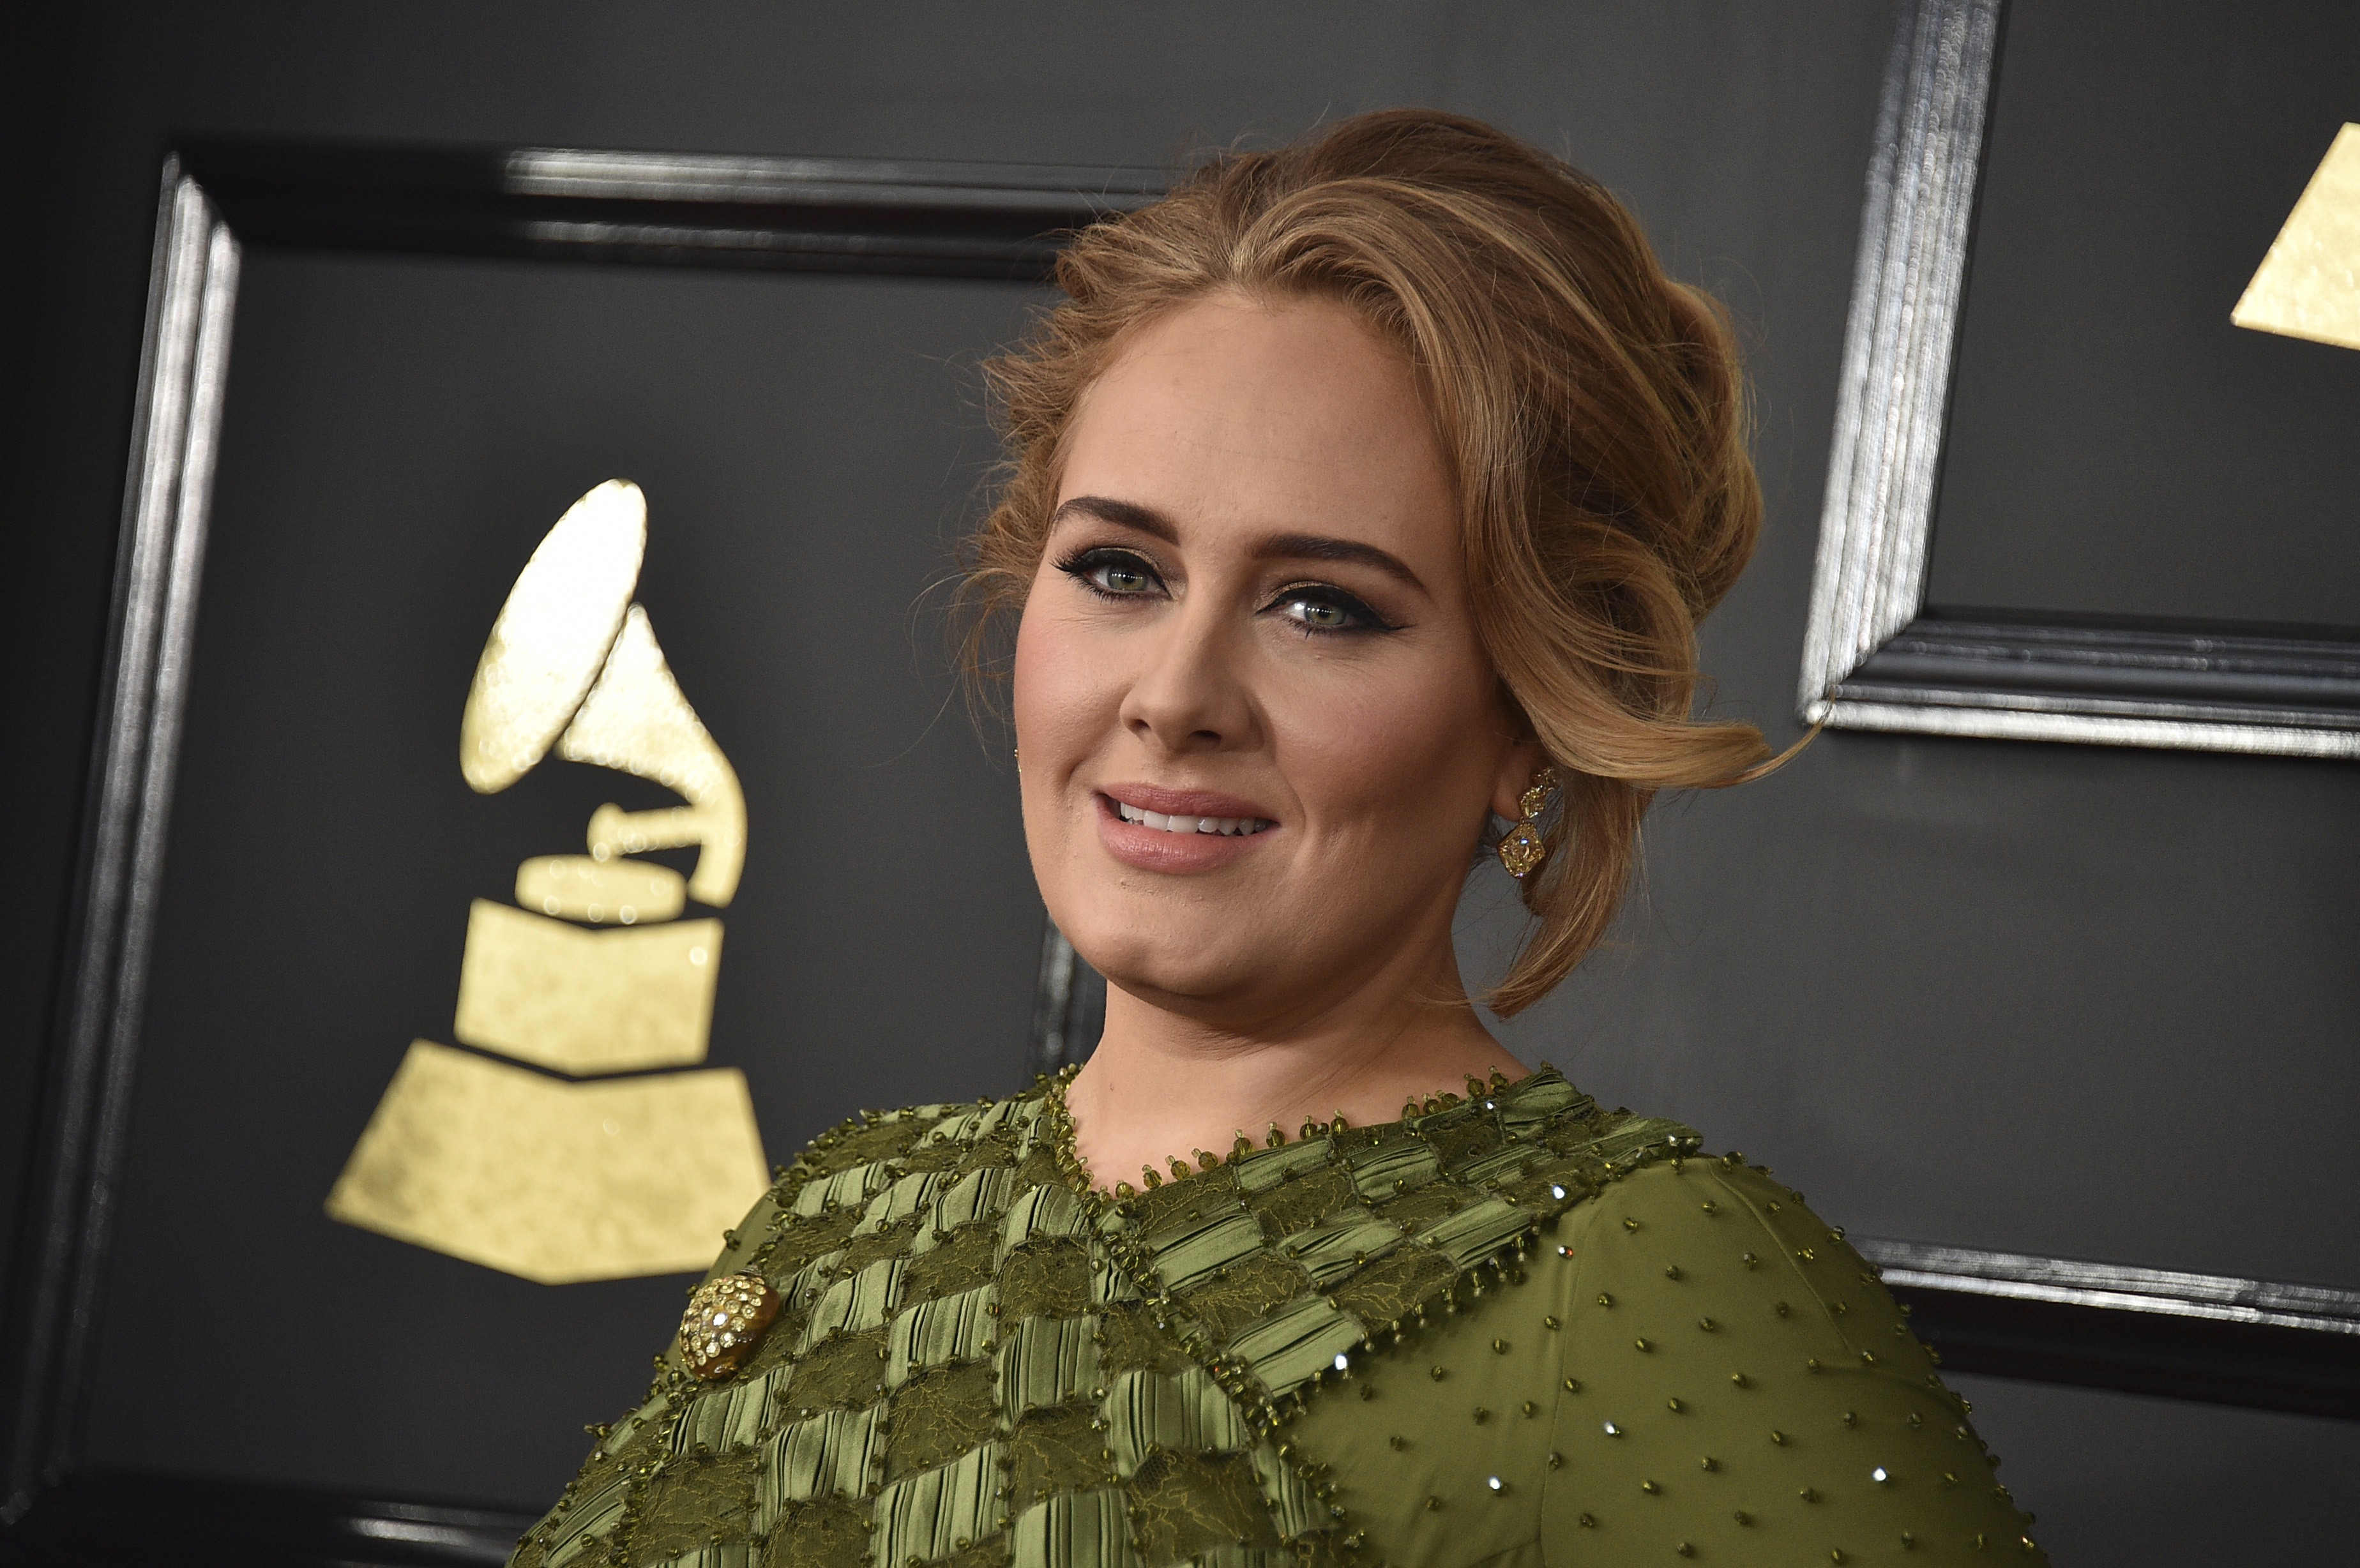 Adele has finally announced a follow-up to 2015’s world-slaying album, 25, but when will it be released? Photo: Invision/AP